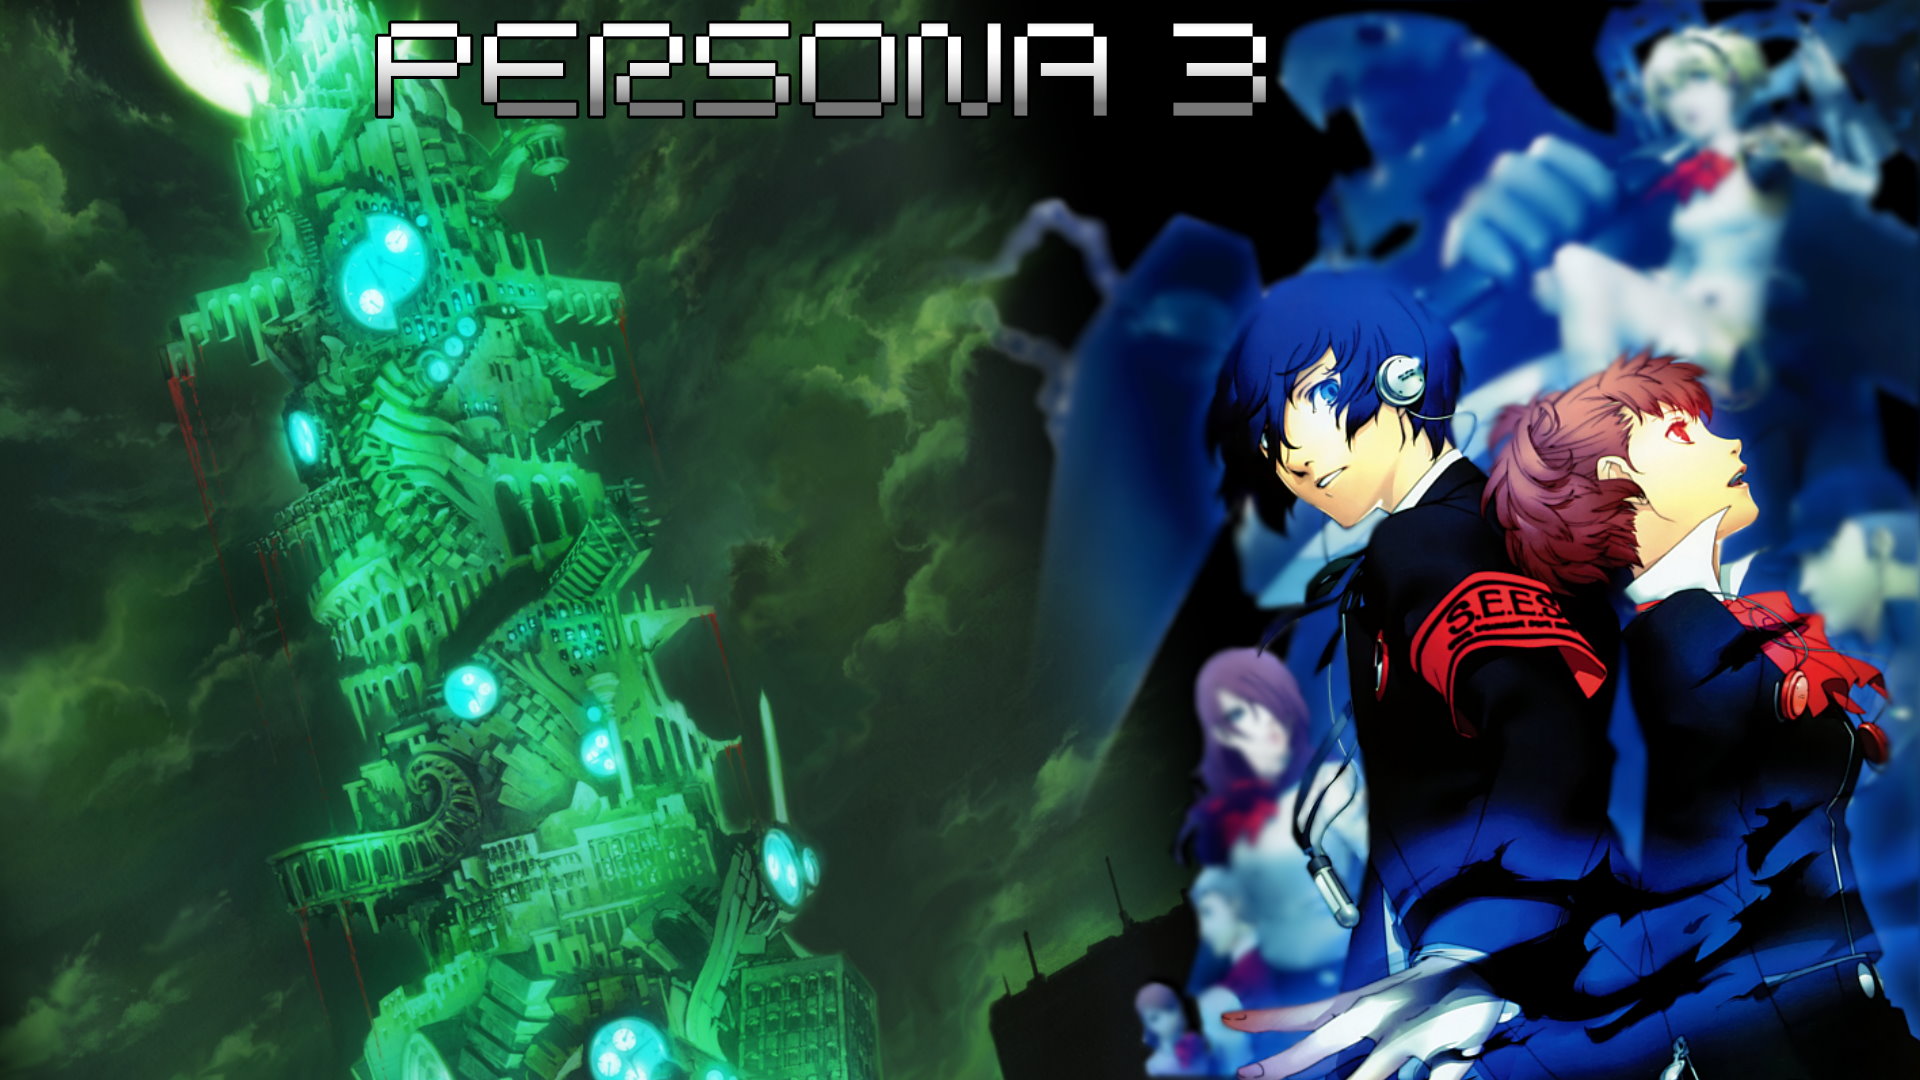 Free Download Persona 3 Wallpaper By Fates Destiny 19x1080 For Your Desktop Mobile Tablet Explore 48 Persona 3 Wallpapers Persona Q Wallpaper Persona 5 Hd Wallpaper Persona 3 Wallpaper Widescreen